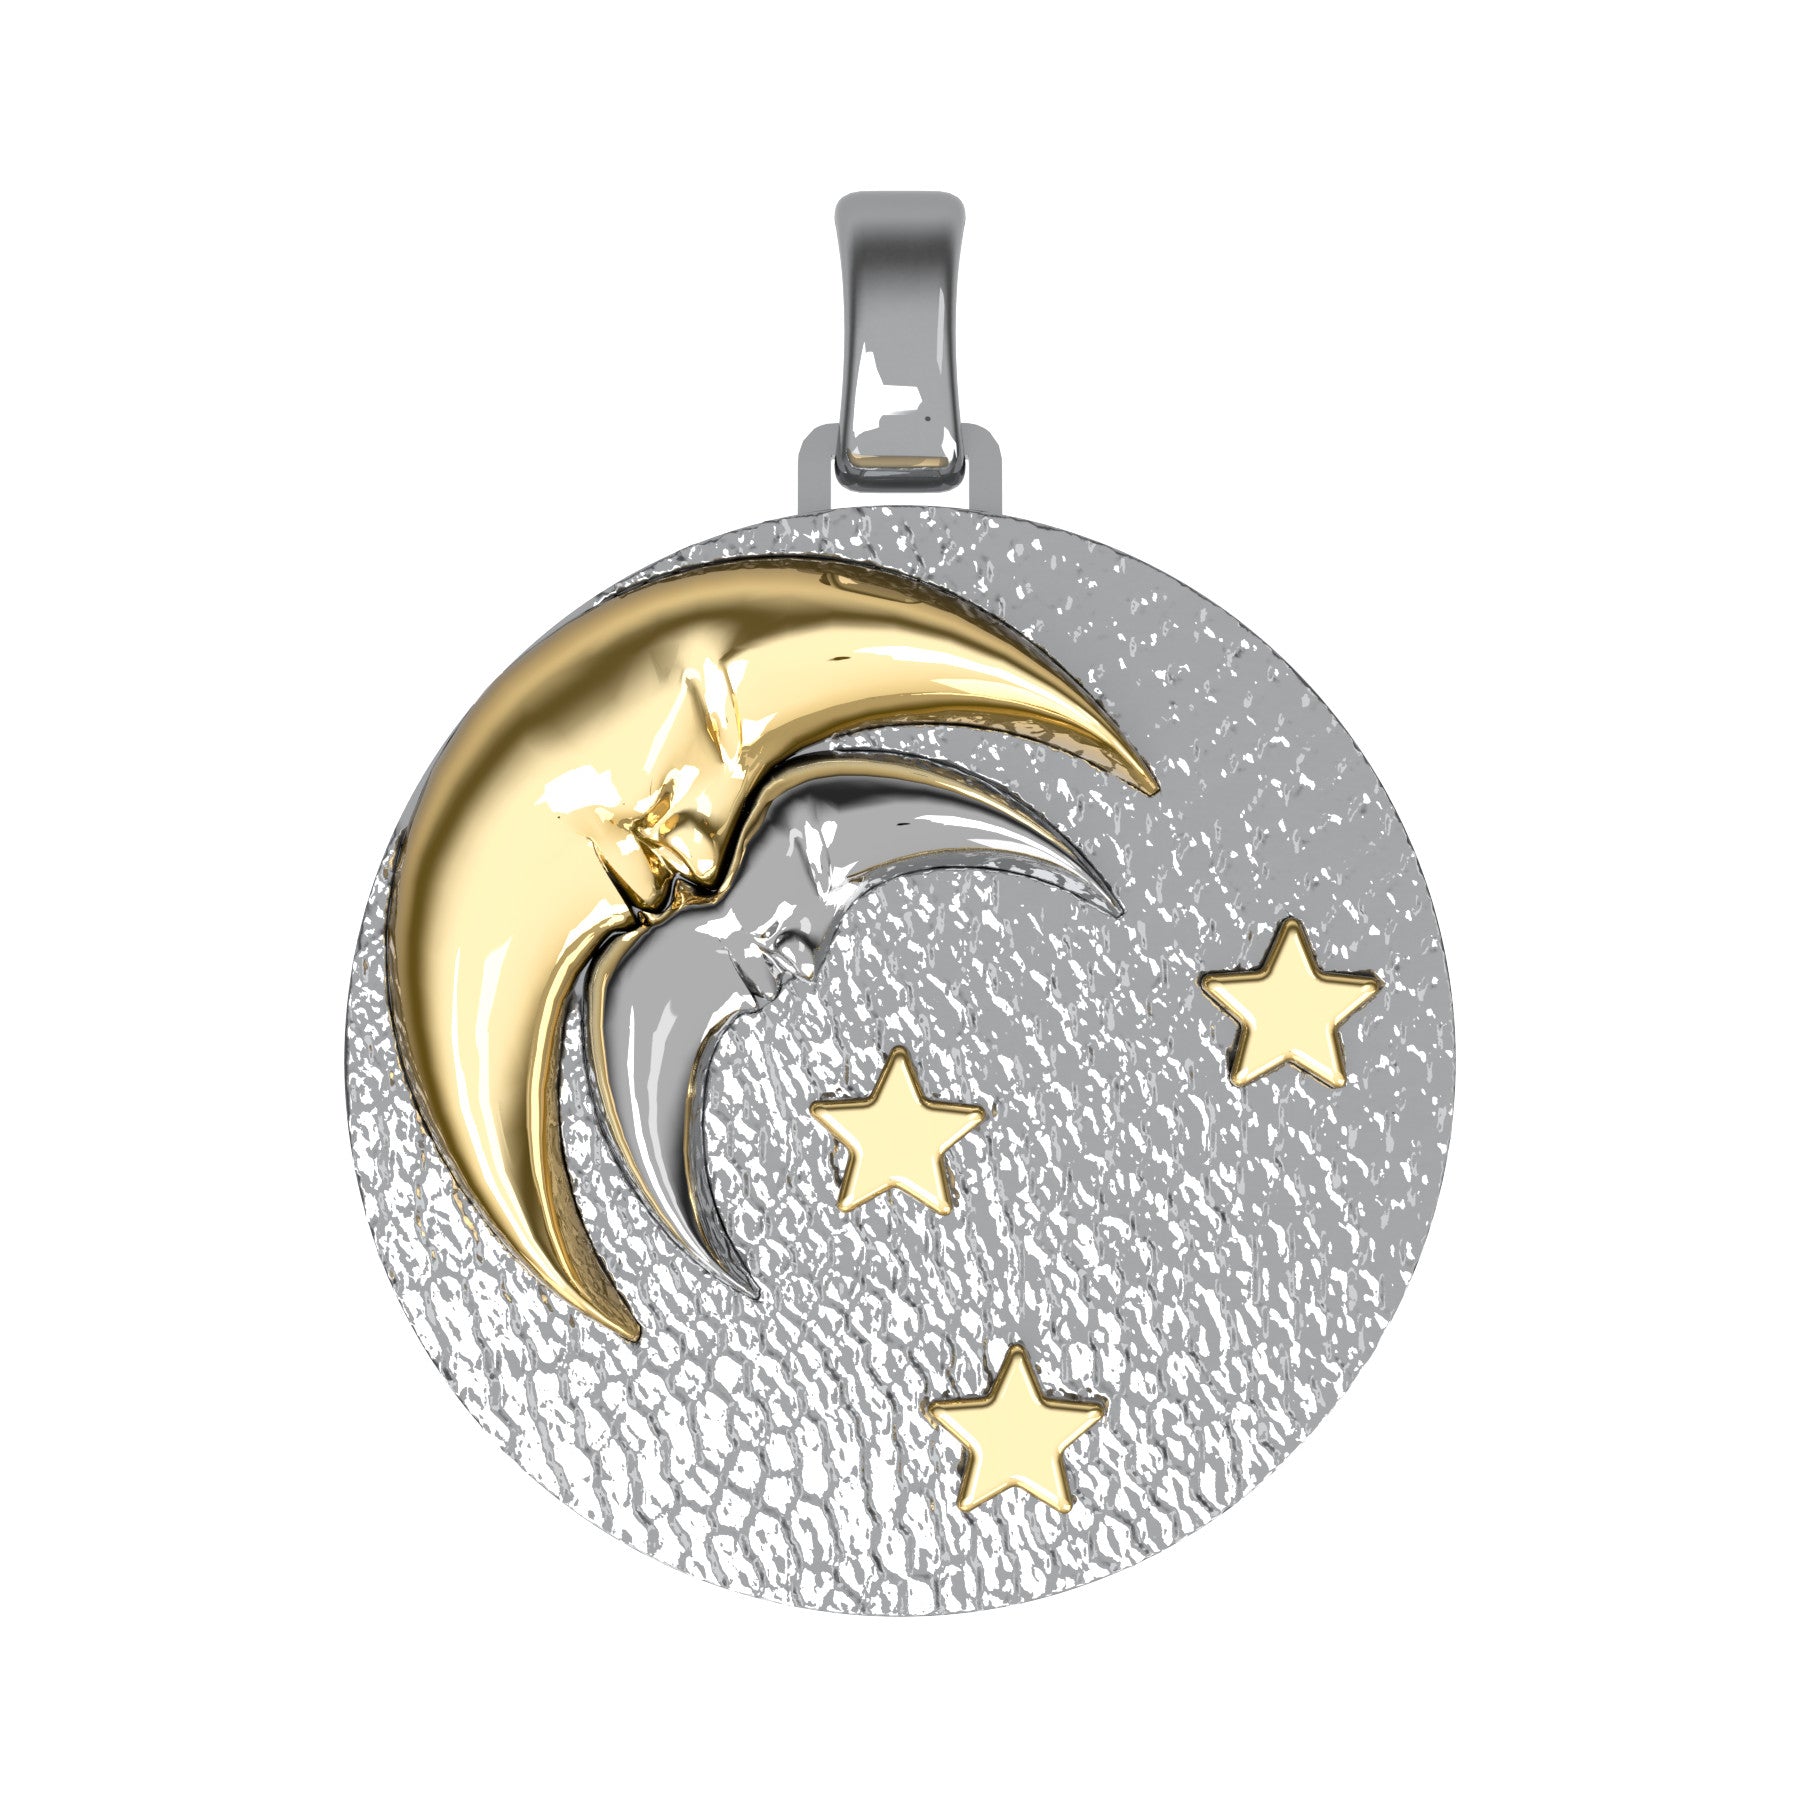 Double half moon pendant, sterling silver and golden sterling silver, weight about 38,2 g (1,35 oz), diameter 40 mm